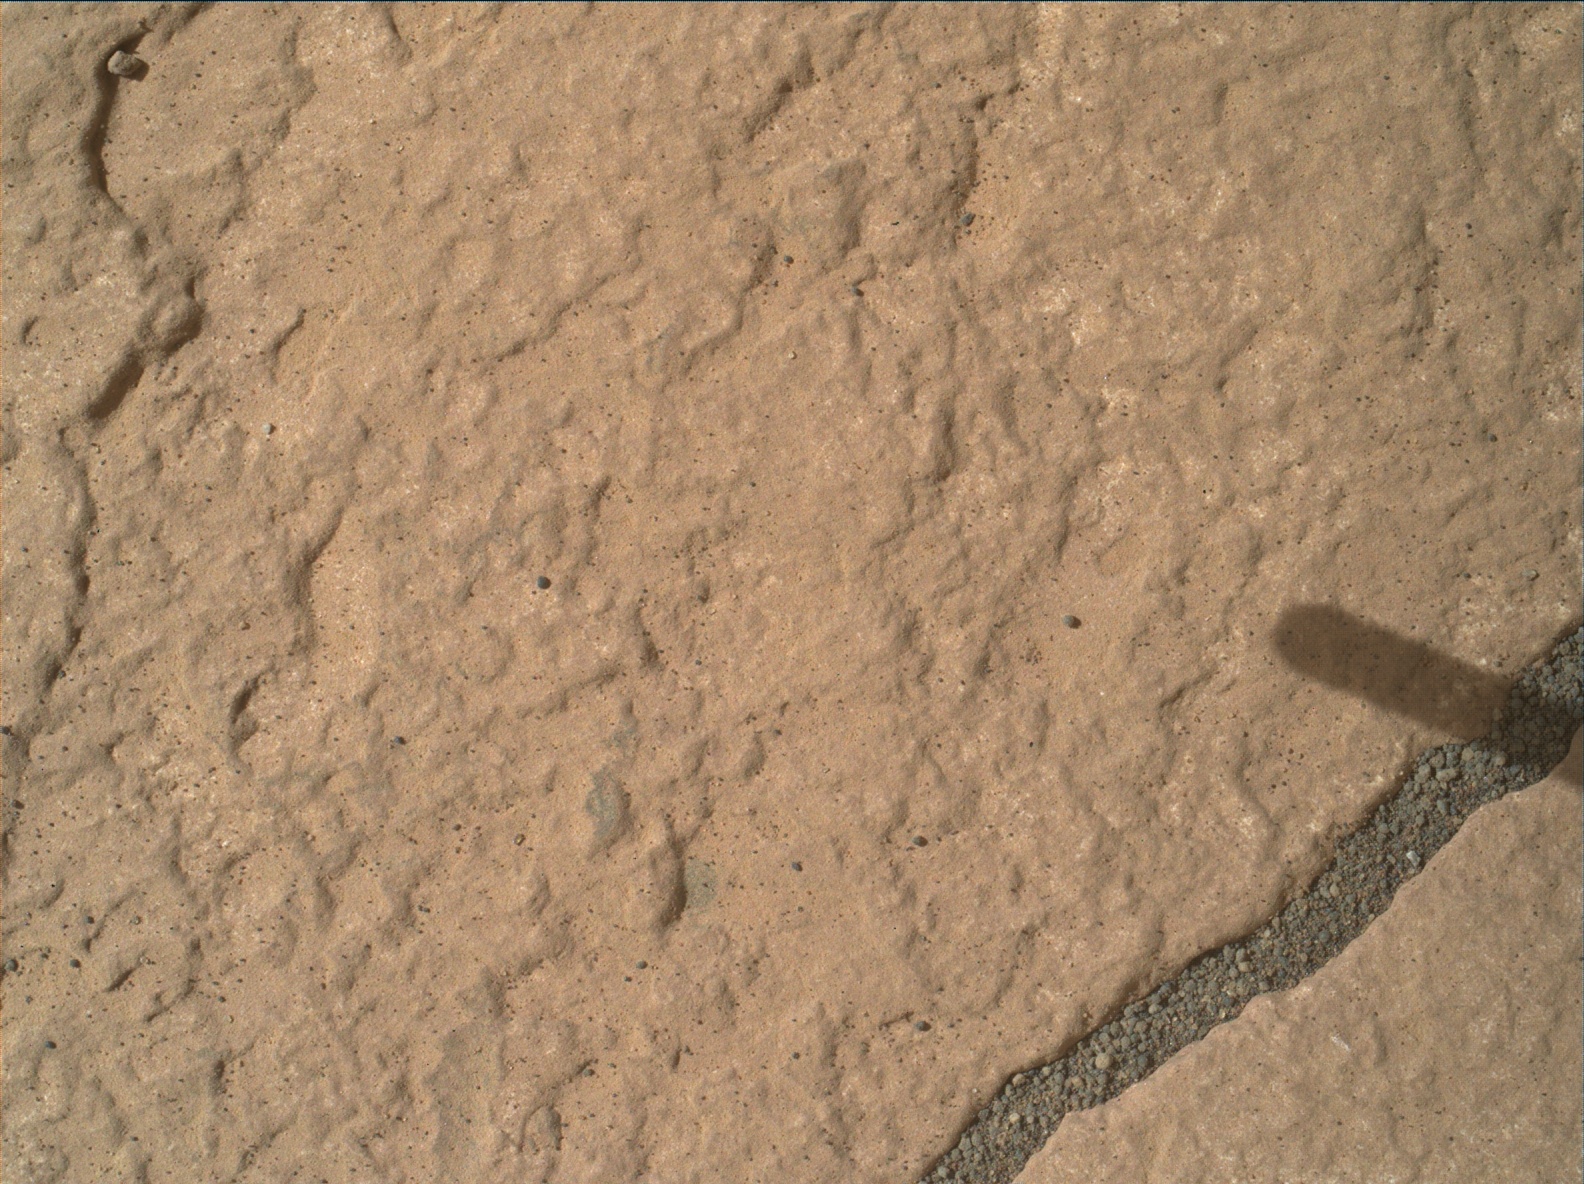 Nasa's Mars rover Curiosity acquired this image using its Mars Hand Lens Imager (MAHLI) on Sol 1784